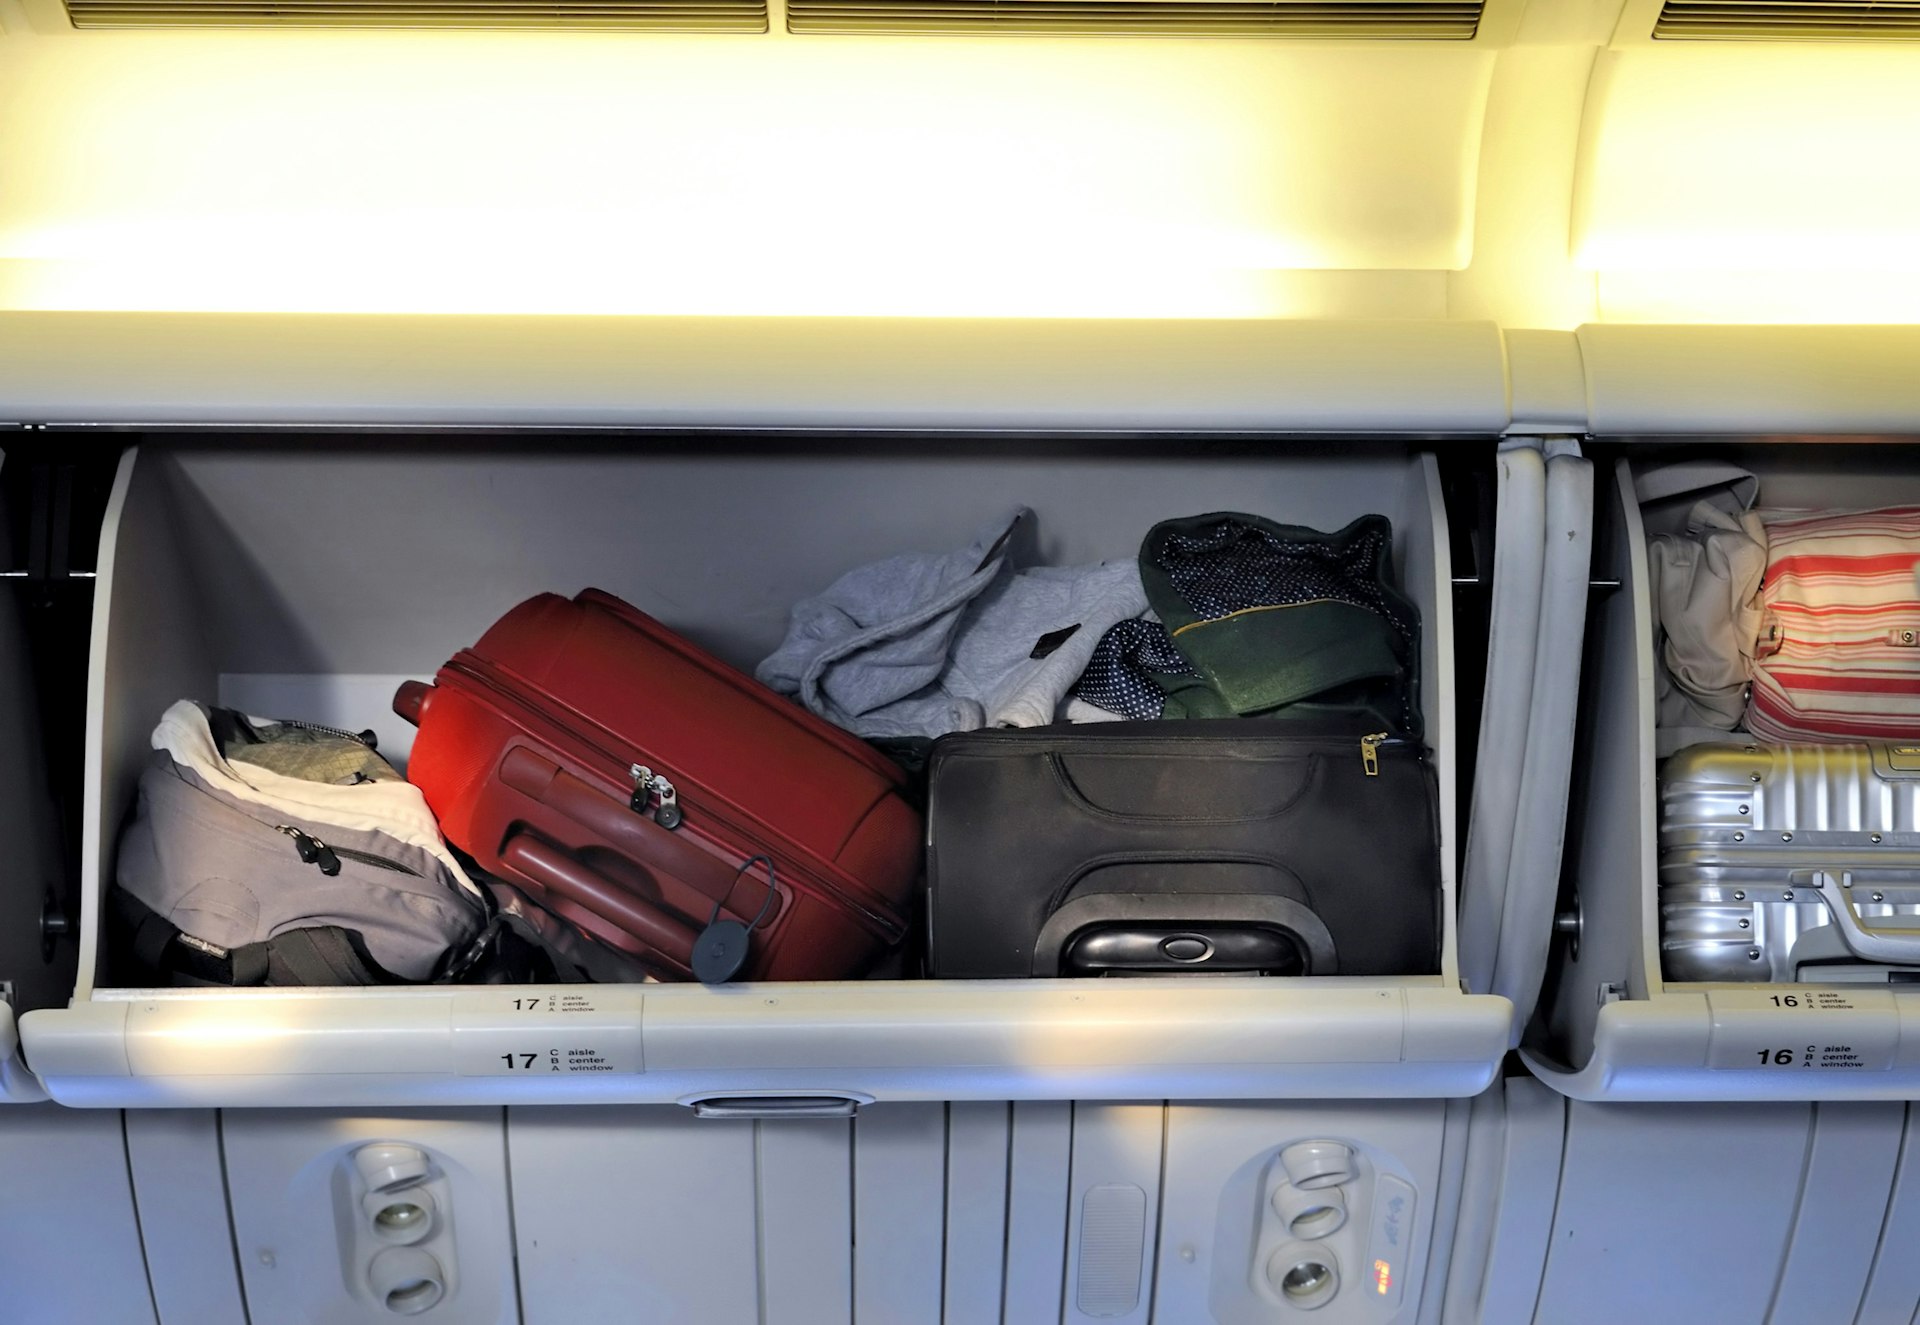 Italy has prohibited the use of overhead bins to help reduce the spread of COVID-19